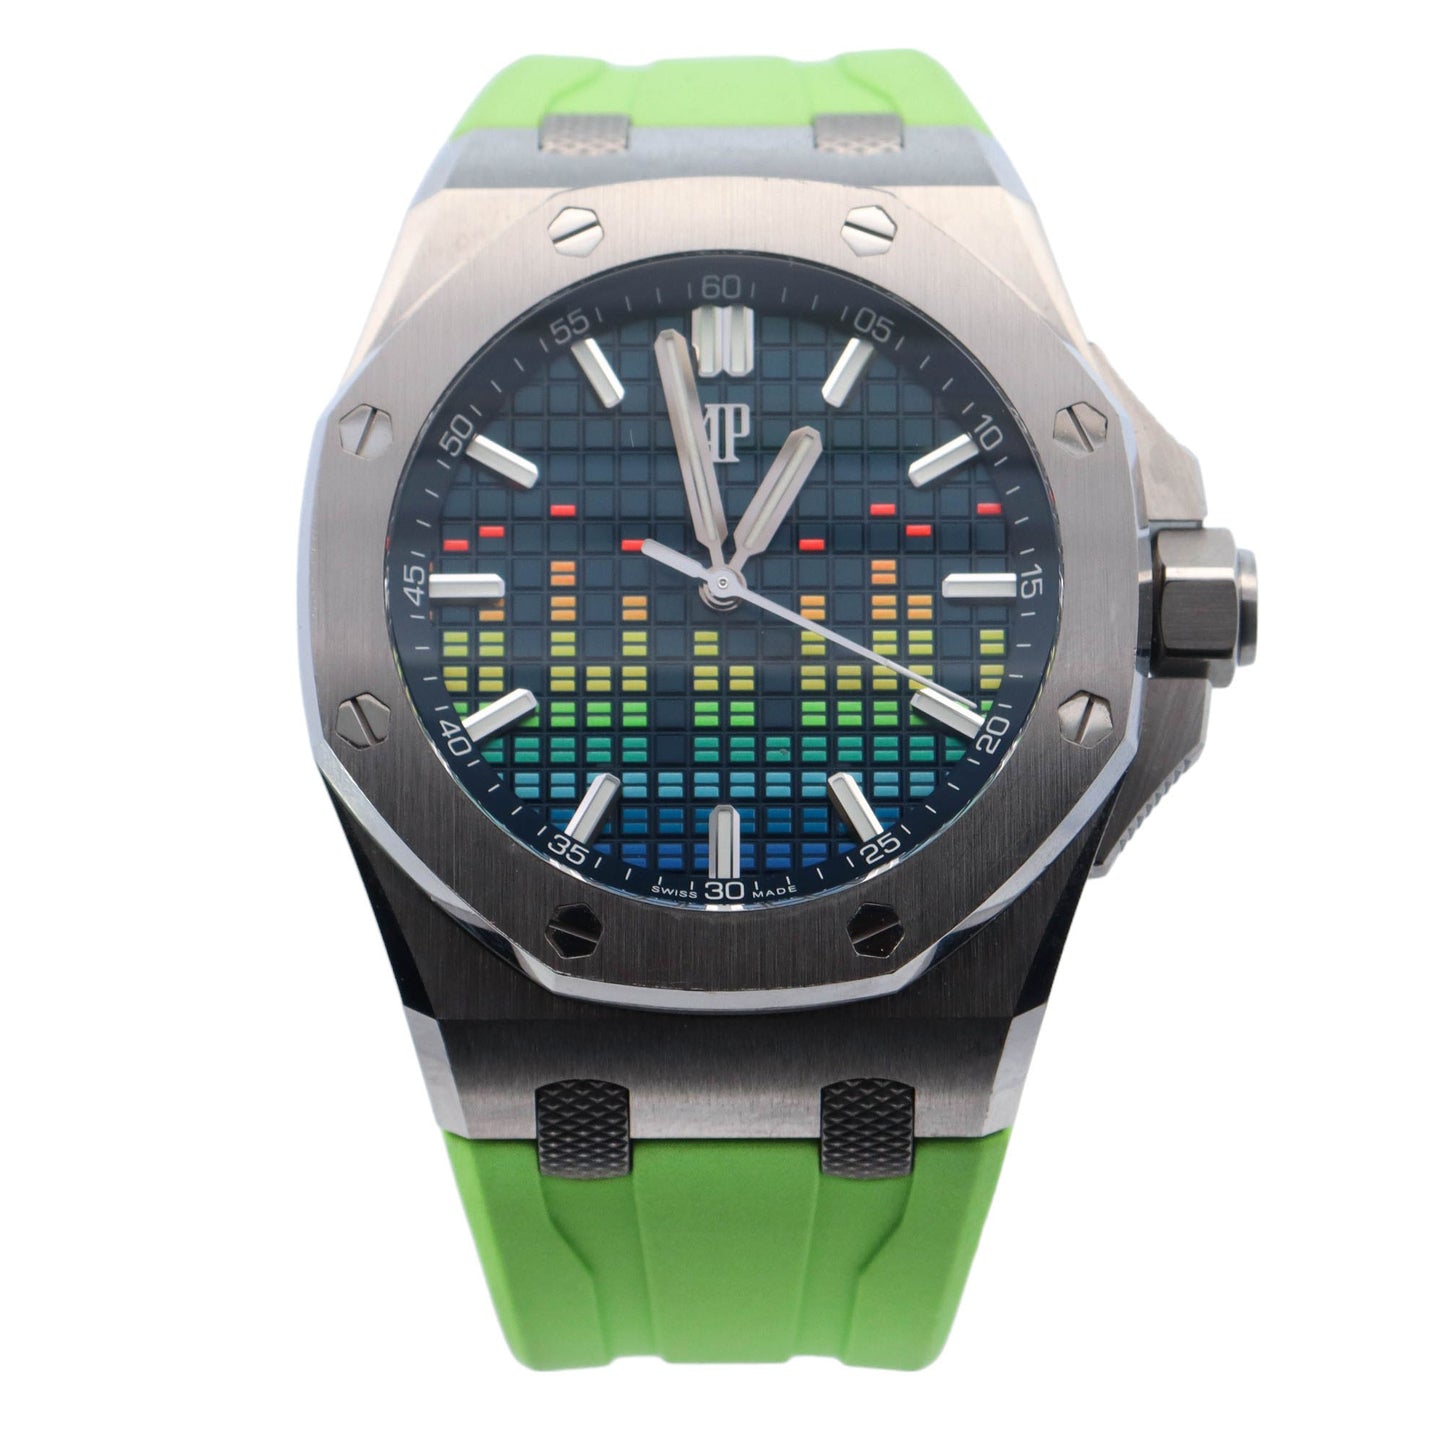 Audemars Piguet Royal Oak Offshore "Music Edition" Titanium 43mm Multicolor Stick Dial Watch Reference# 15600TI.OO.A343CA.01 - Happy Jewelers Fine Jewelry Lifetime Warranty